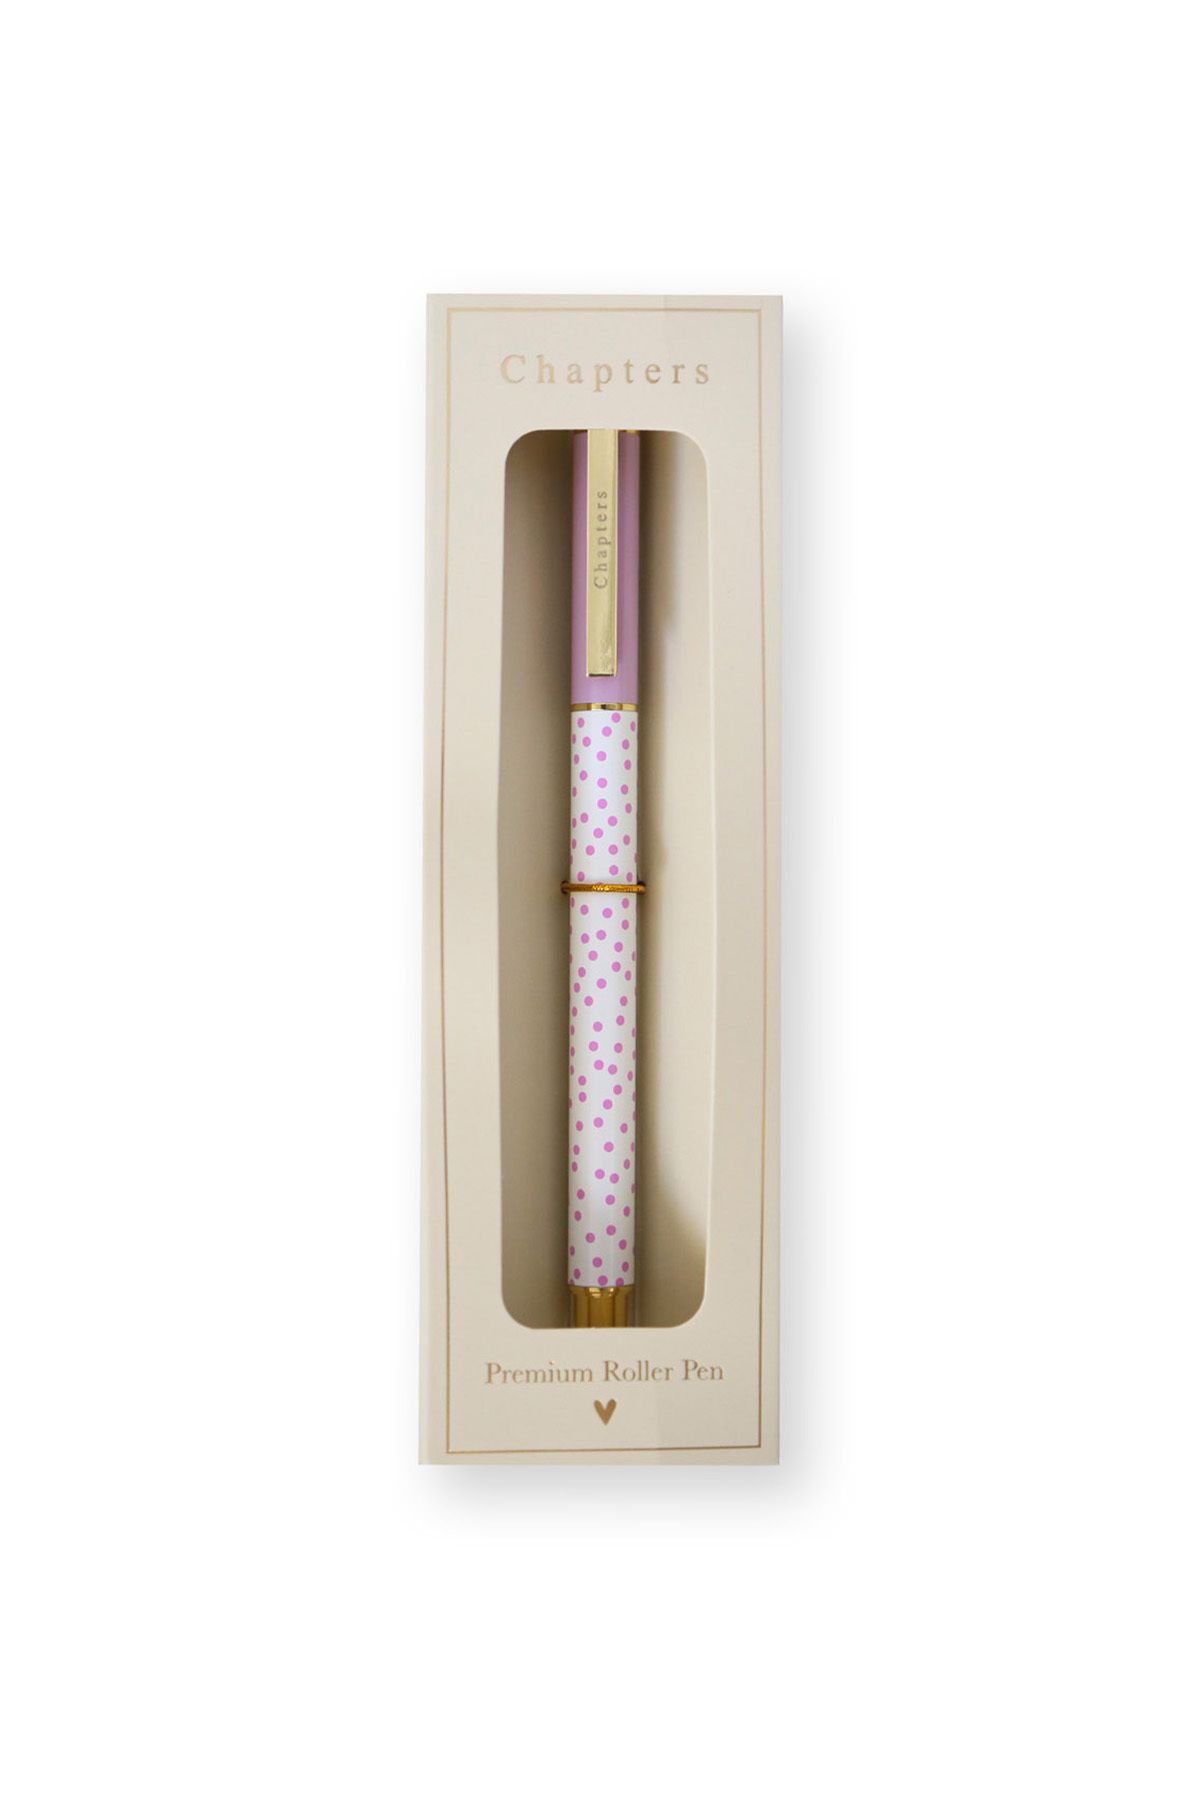 Chapters Premium Roller Pen, Lilac Polka